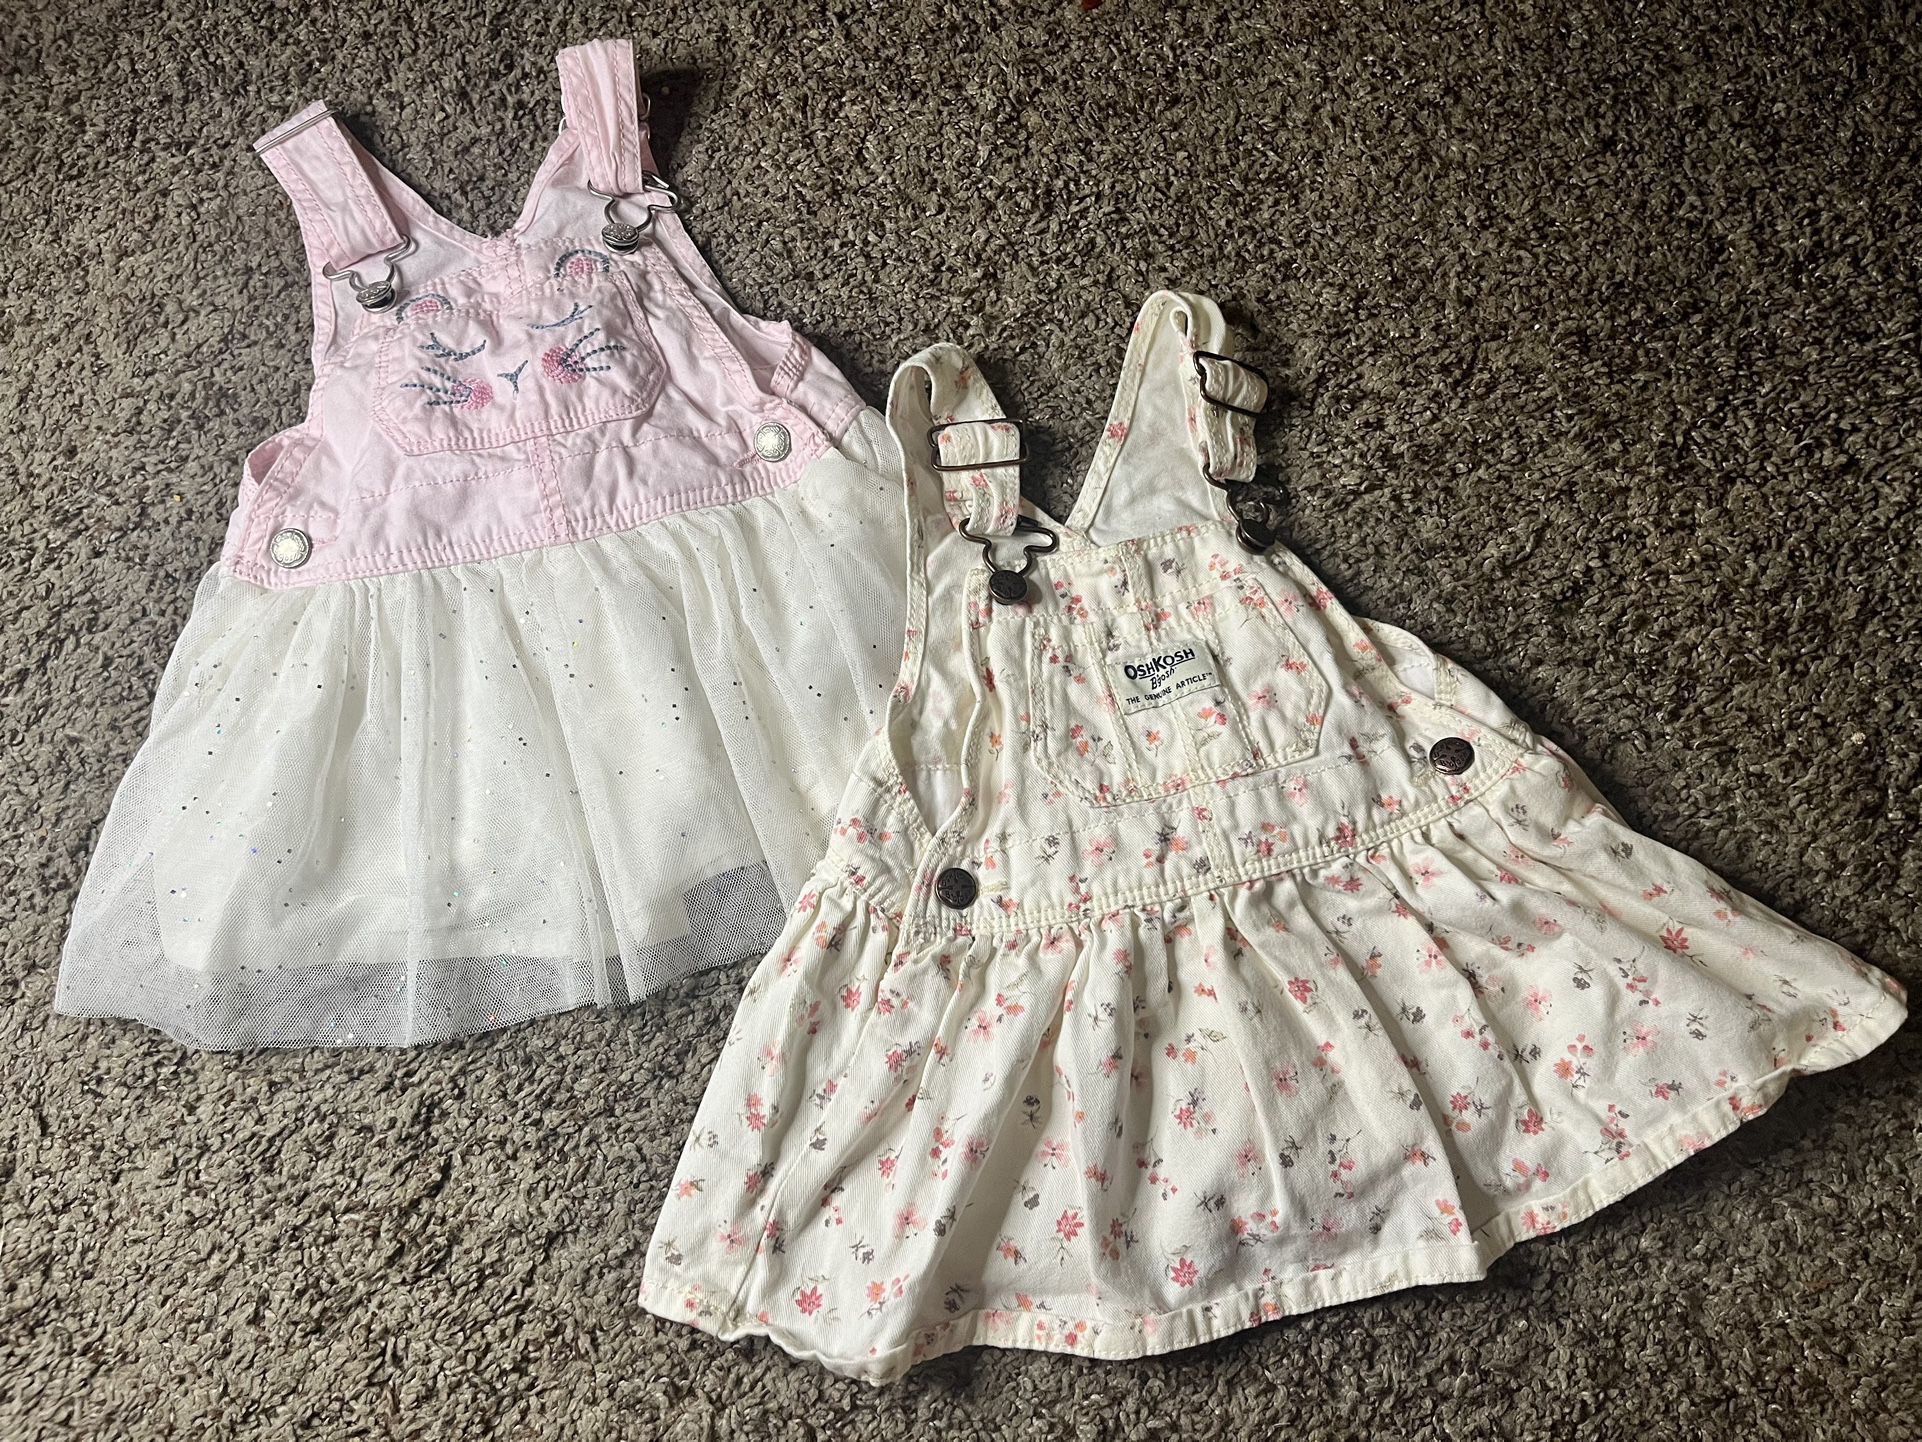 Infant overall dresses $5 Each 